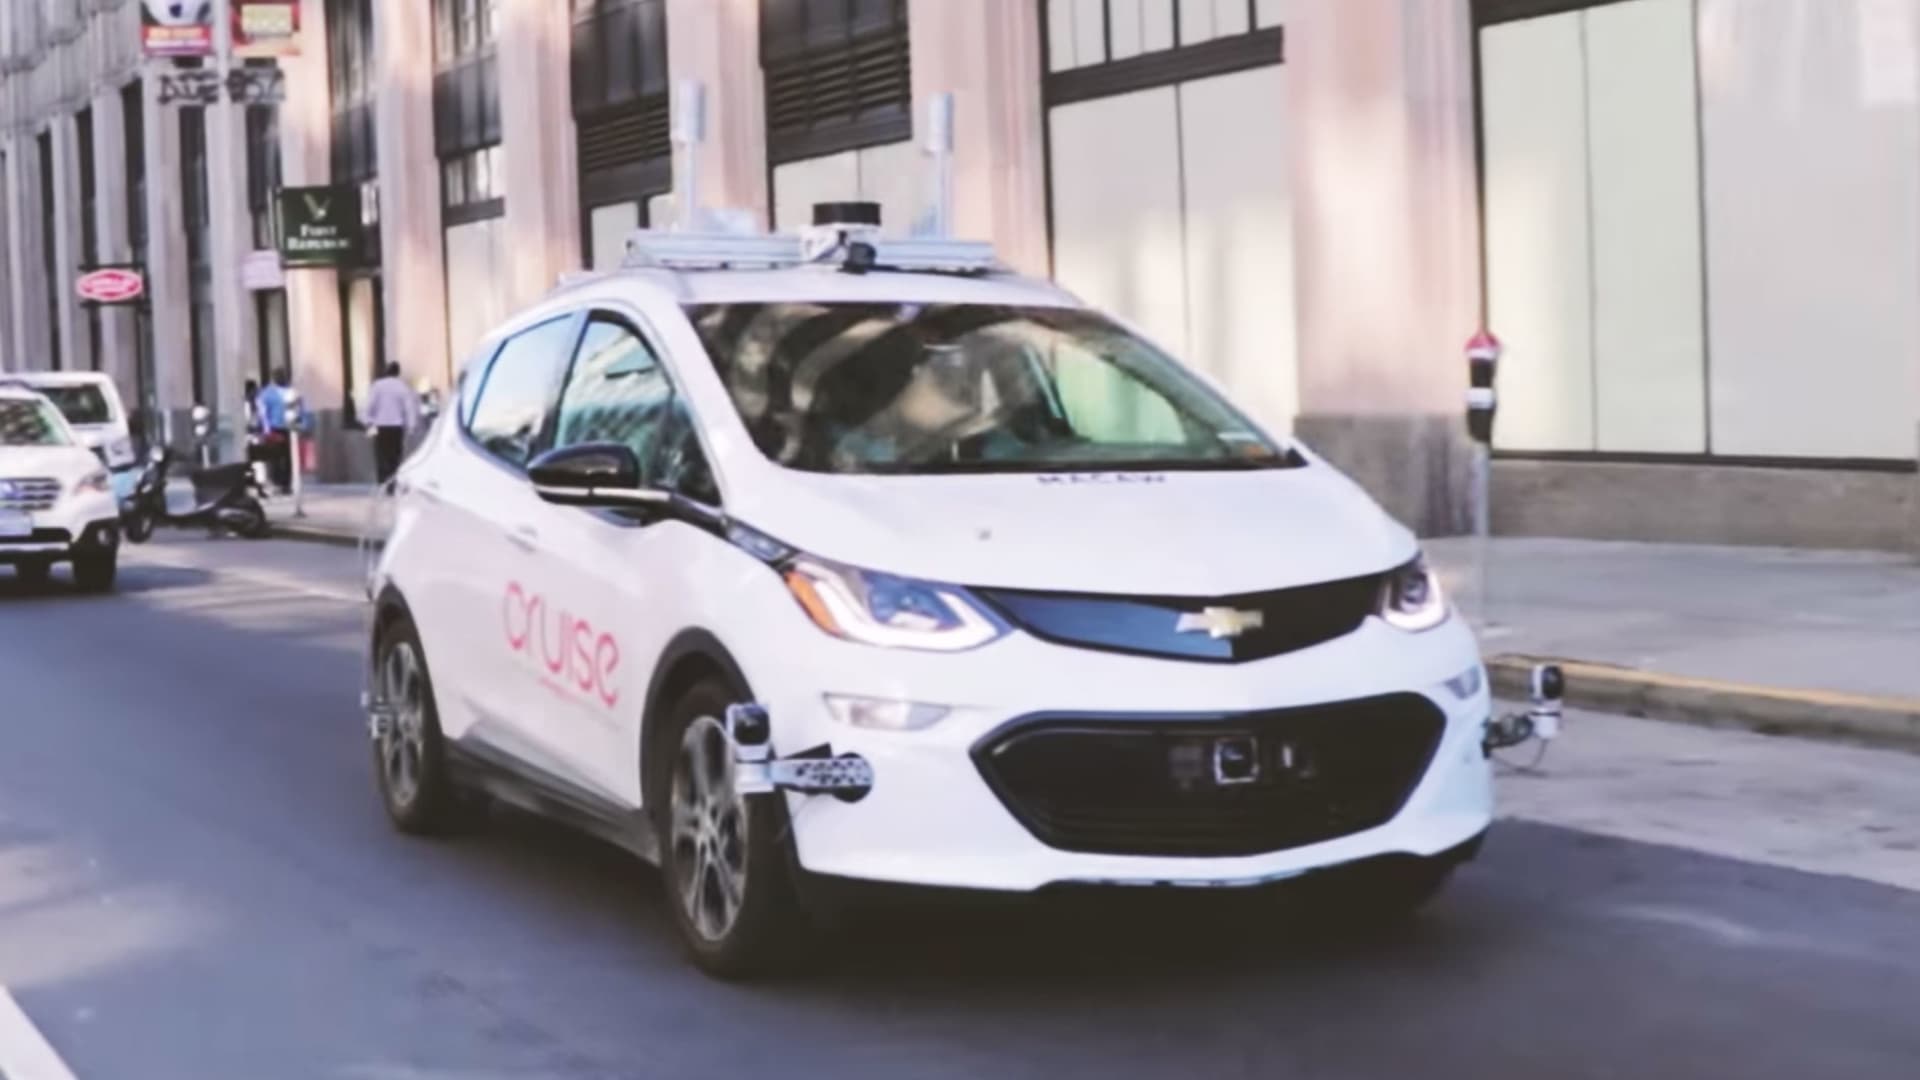 Video shows what happens when a driverless car gets pulled over